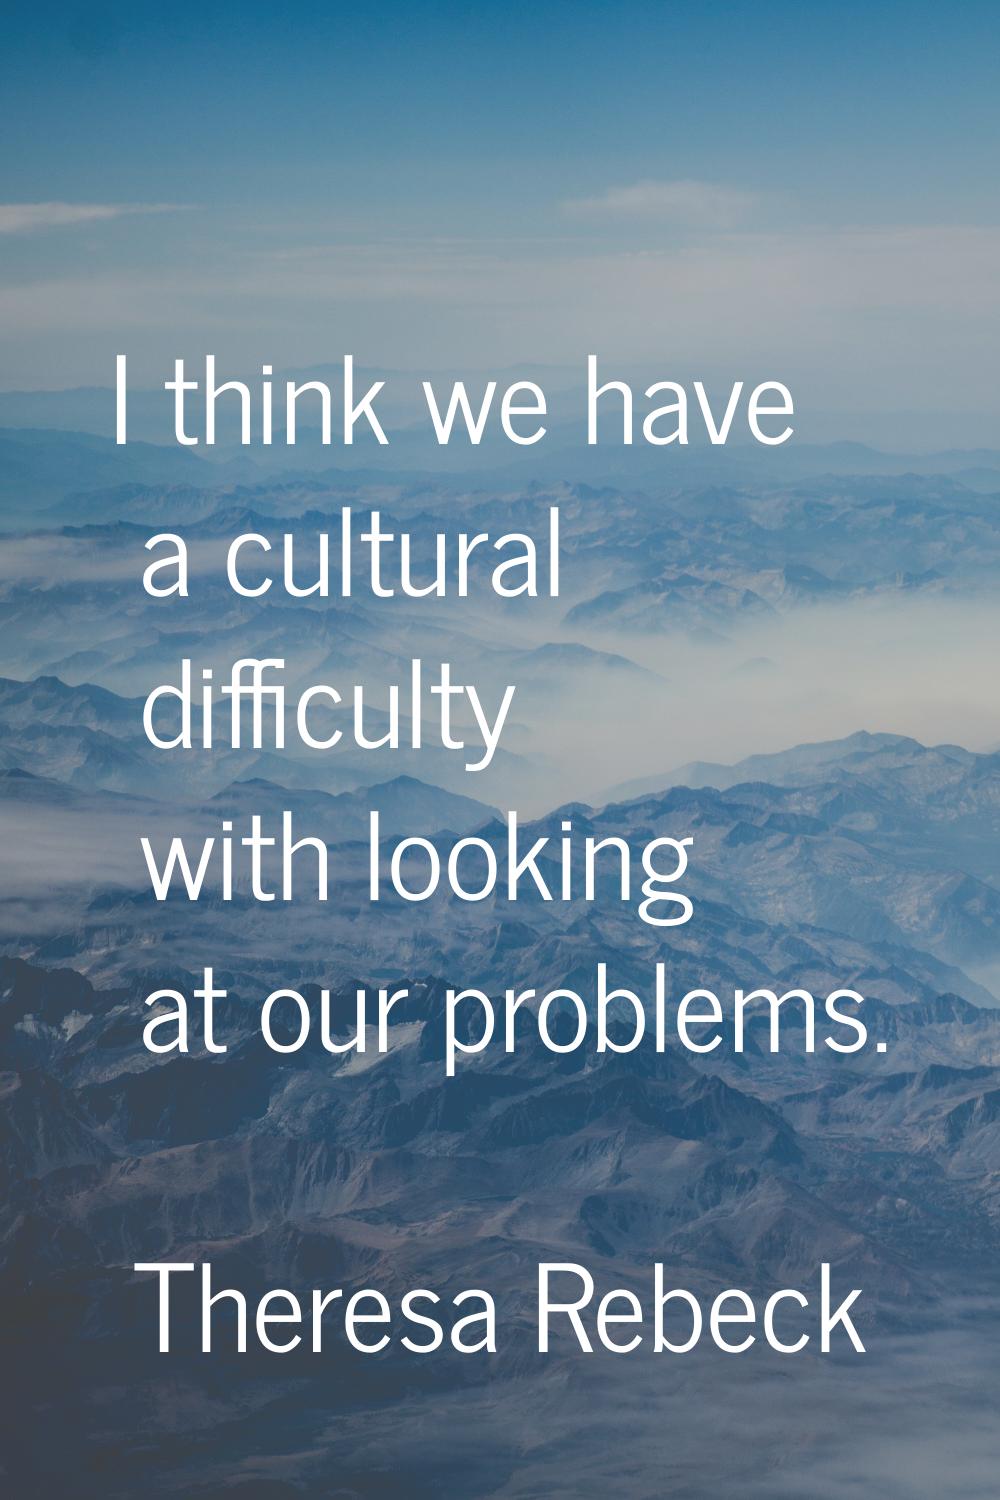 I think we have a cultural difficulty with looking at our problems.